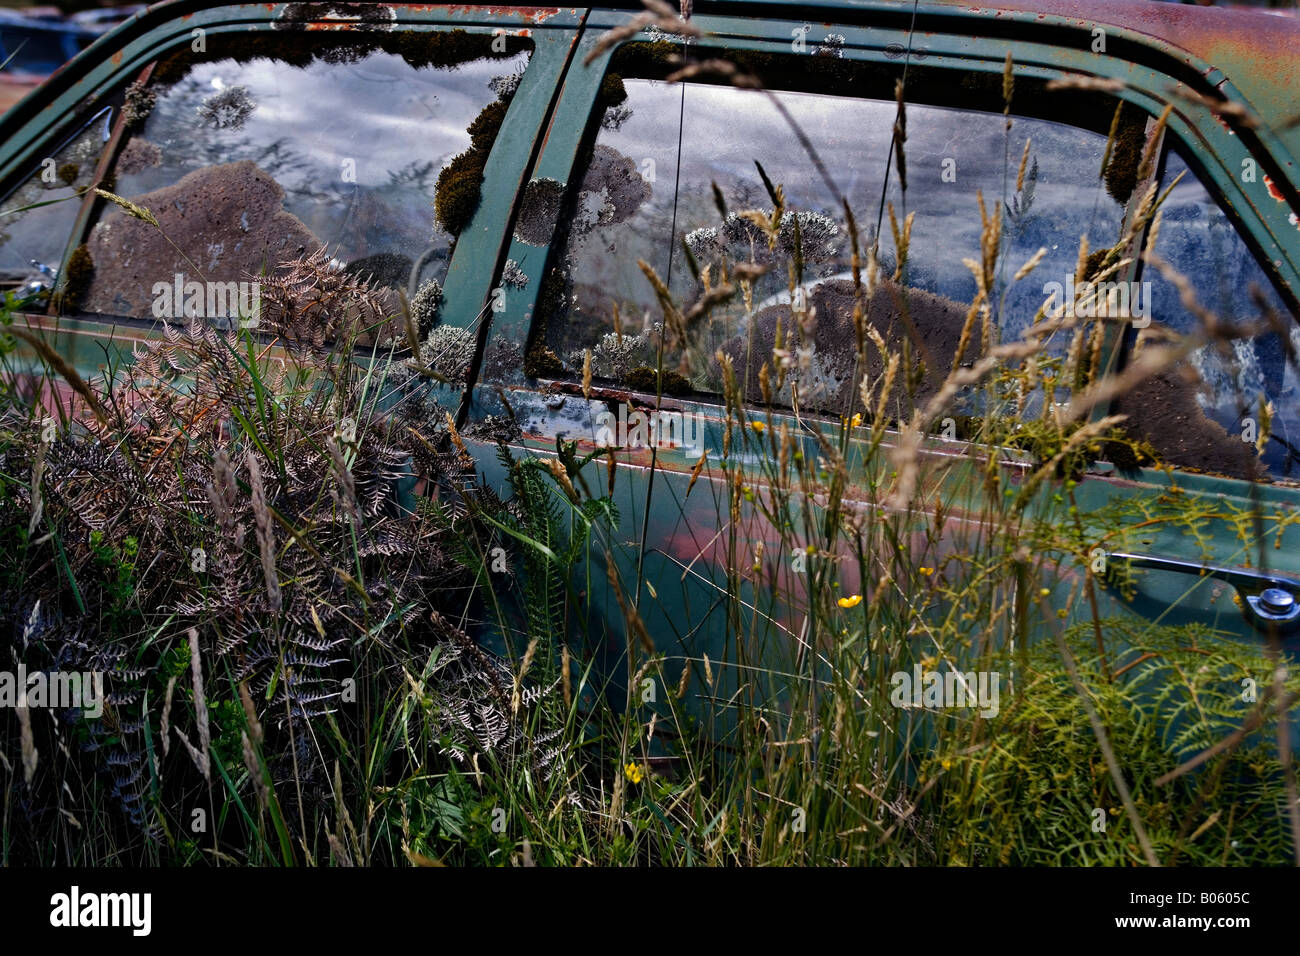 rusting car, overgrown with grass and weeds Stock Photo